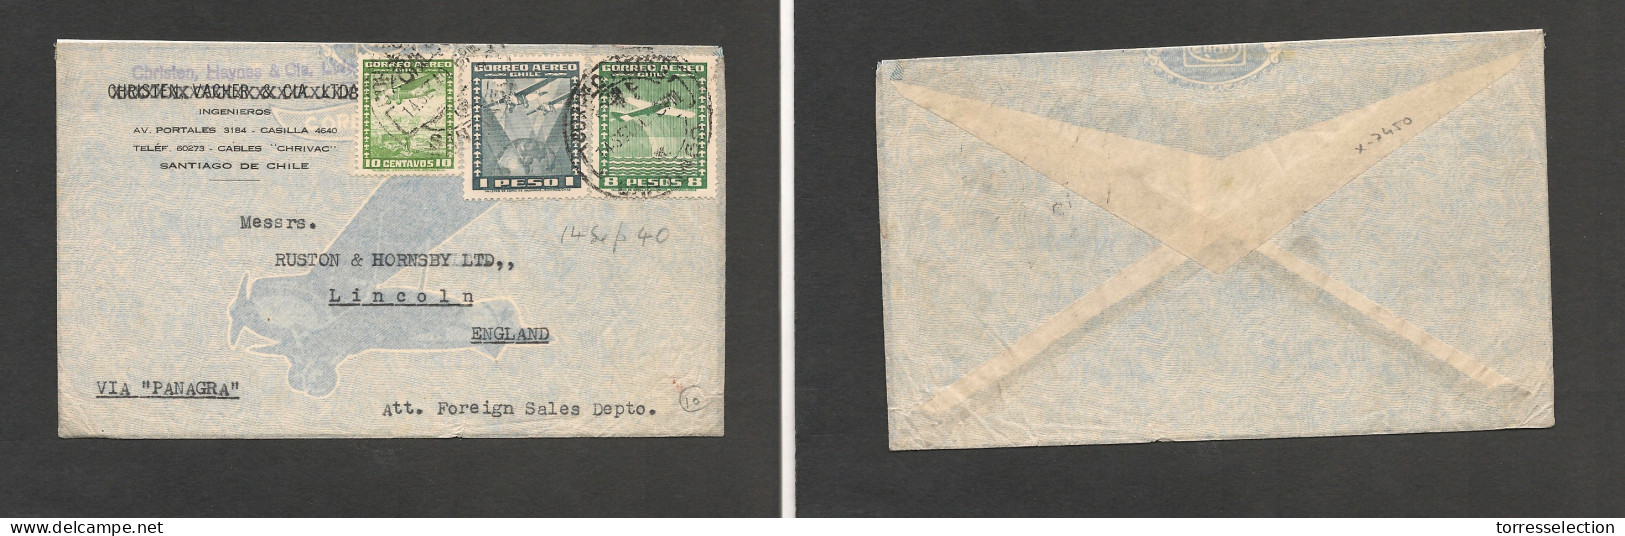 CHILE. Chile - Cover - 1940 17 July Stgo To UK Lincoln Air Mult Fkd Env 9.10 Rate Via Panagra And NY Sea Crossing, Fine. - Chile